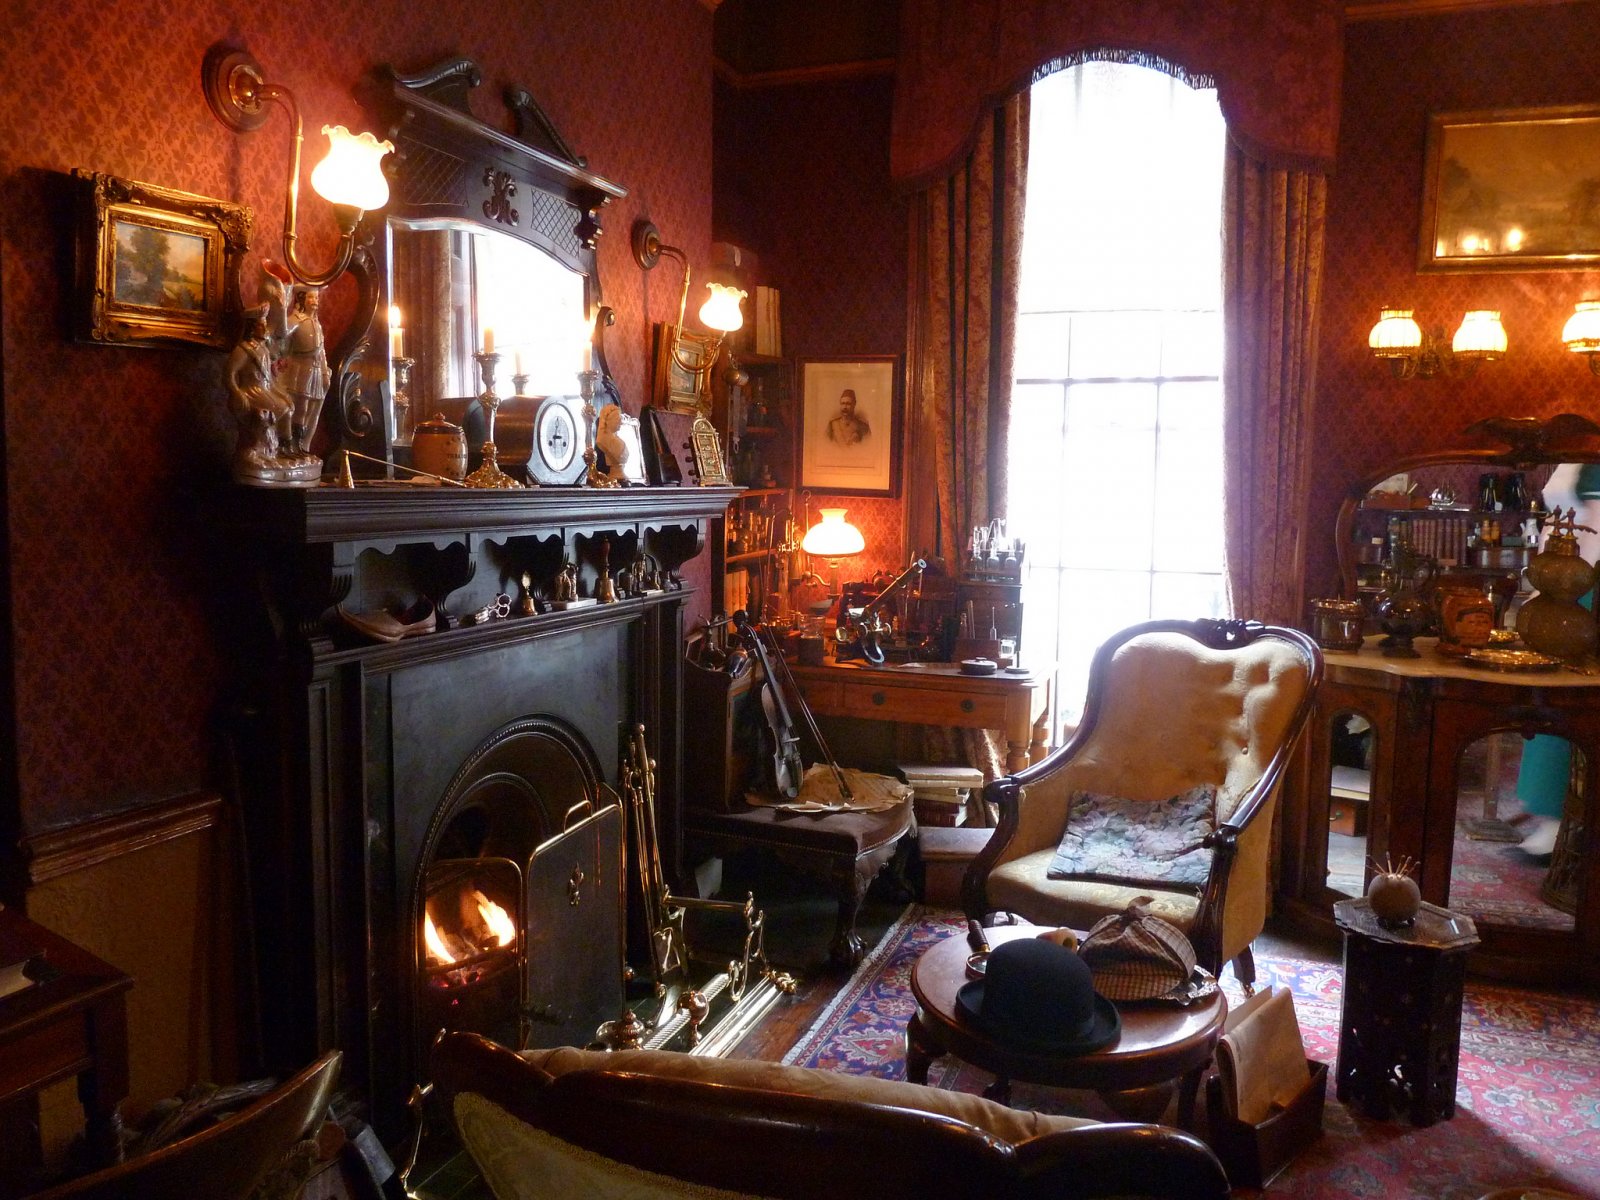 How to pay a visit to Sherlock Holmes in London